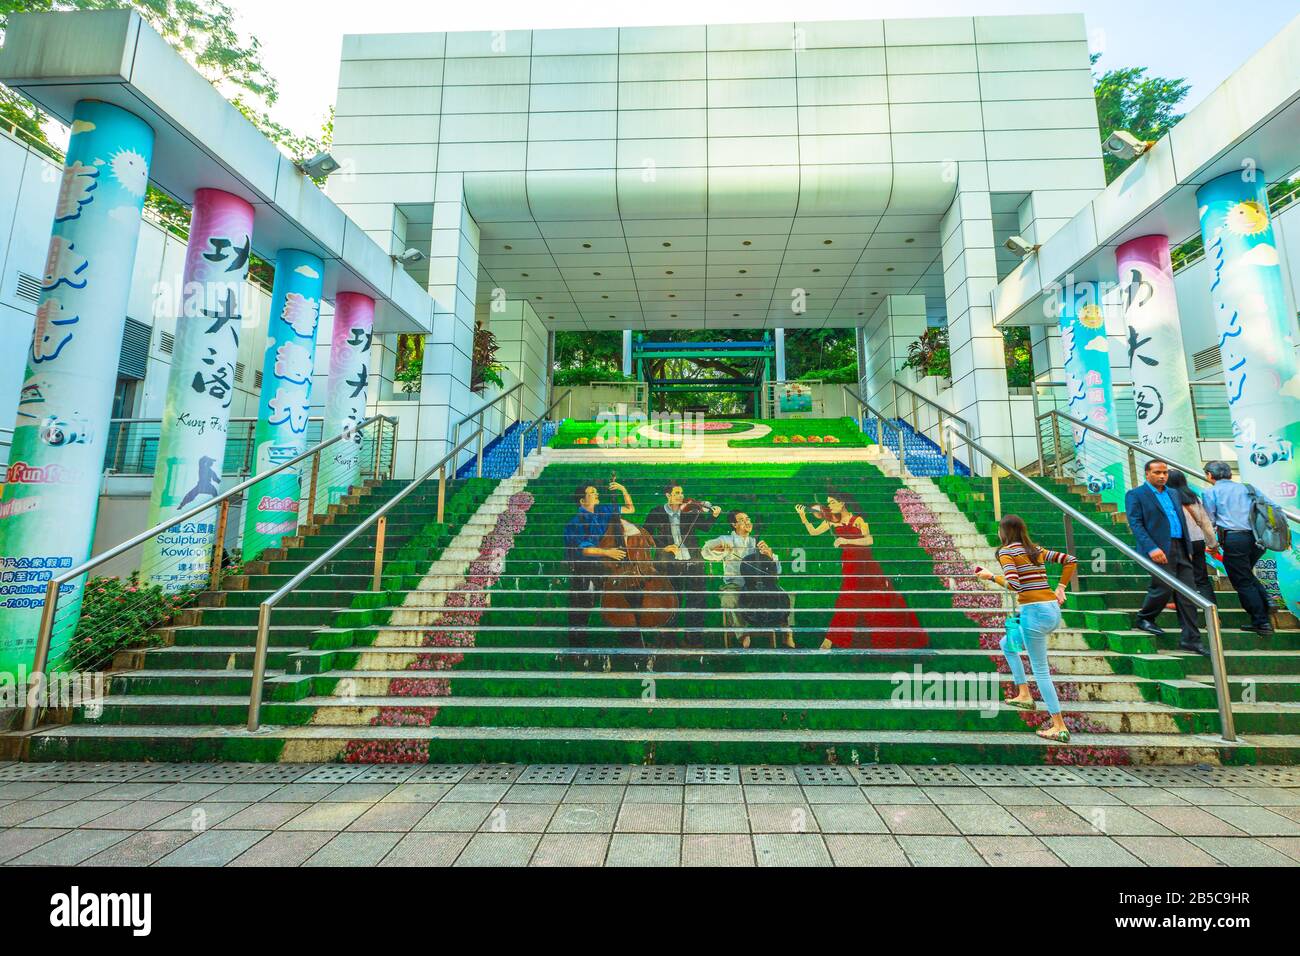 Hong Kong, China - December 5, 2016: entrance stair to Avenue of Comic Stars, Kowloon Park with the statues of the famous characters. Tsim Sha Tsui Stock Photo